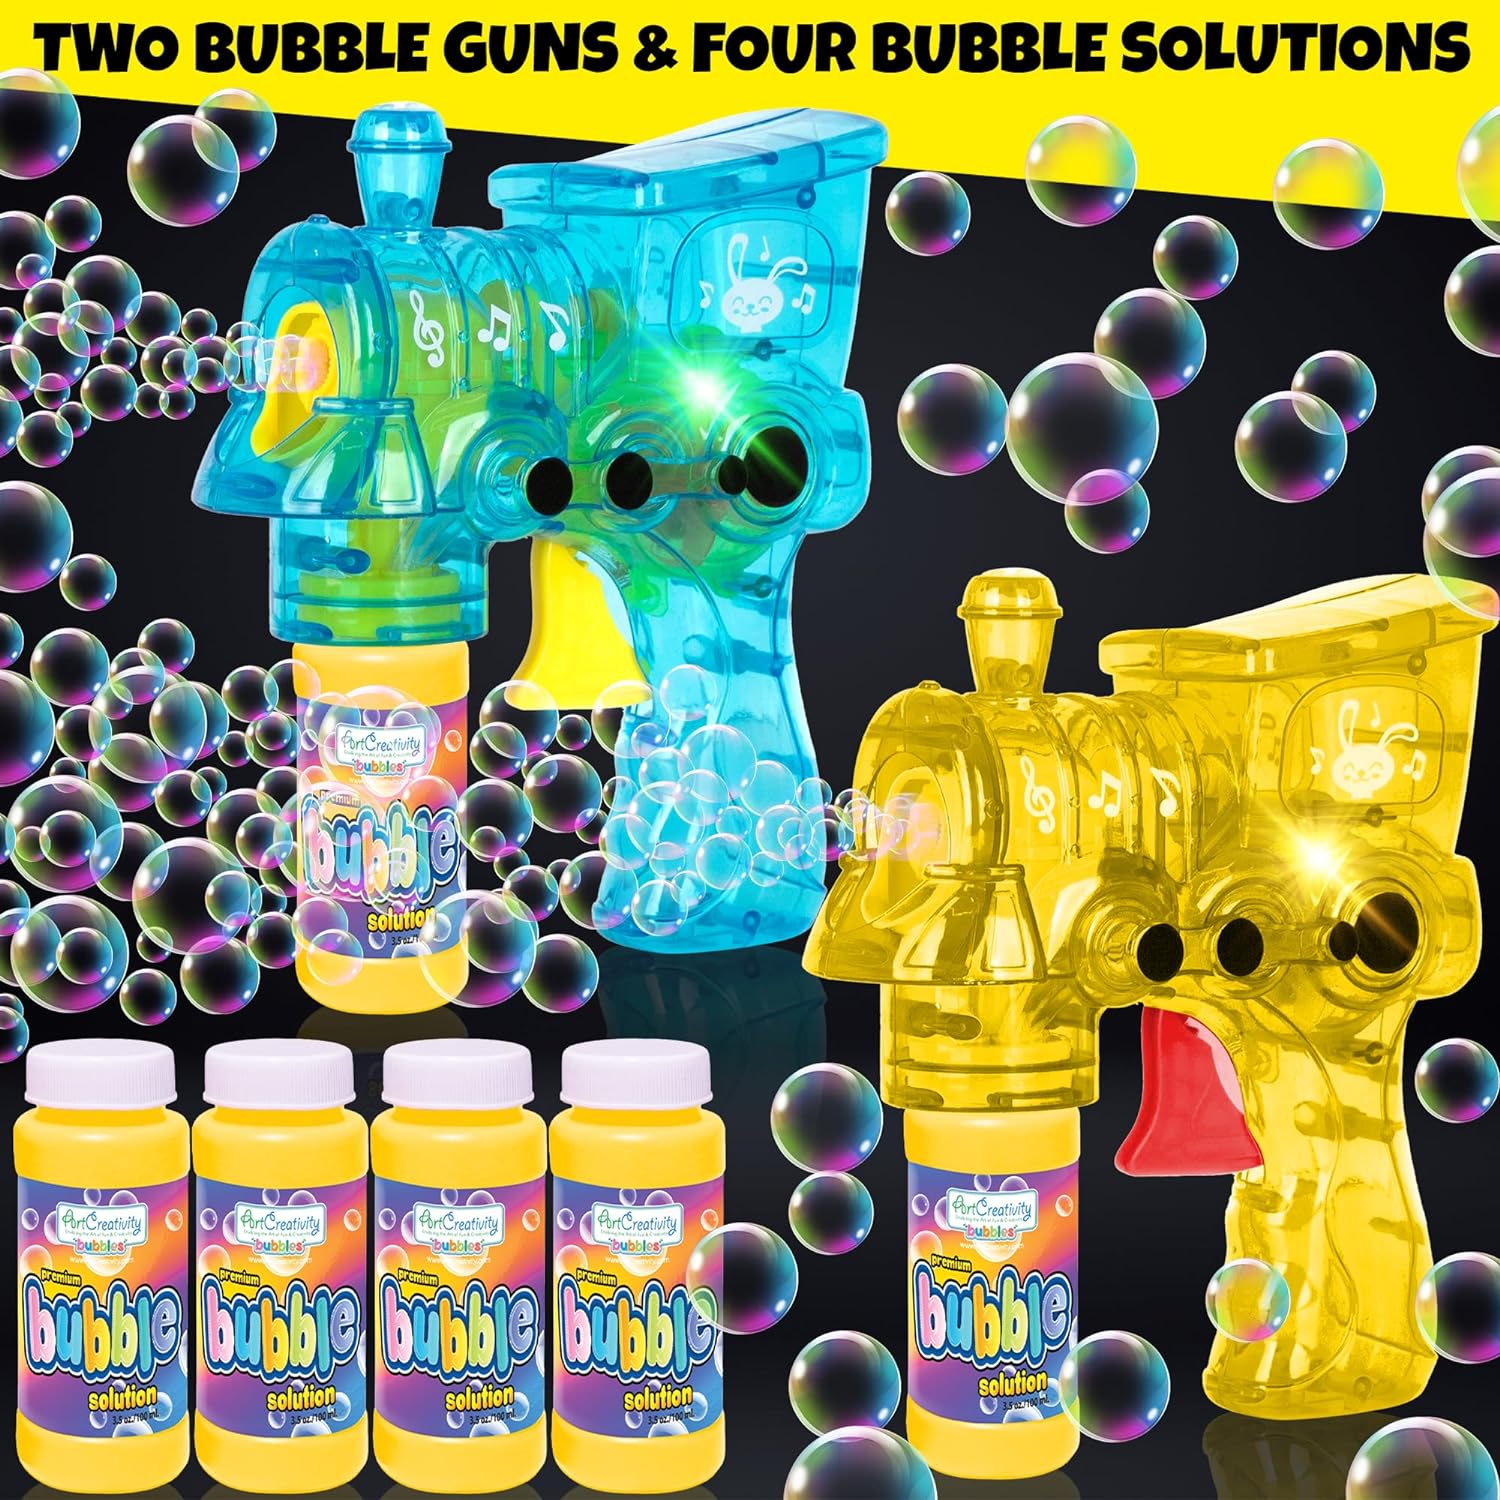 LED Bubble Gun Trains for Kids, 2 Pack Light Up Bubble Gun Blasters and 4 Bottles of Bubble Fluid, Small Bubble Guns (Bulk) for Indoor and Outdoor Fun, No Batteries Included